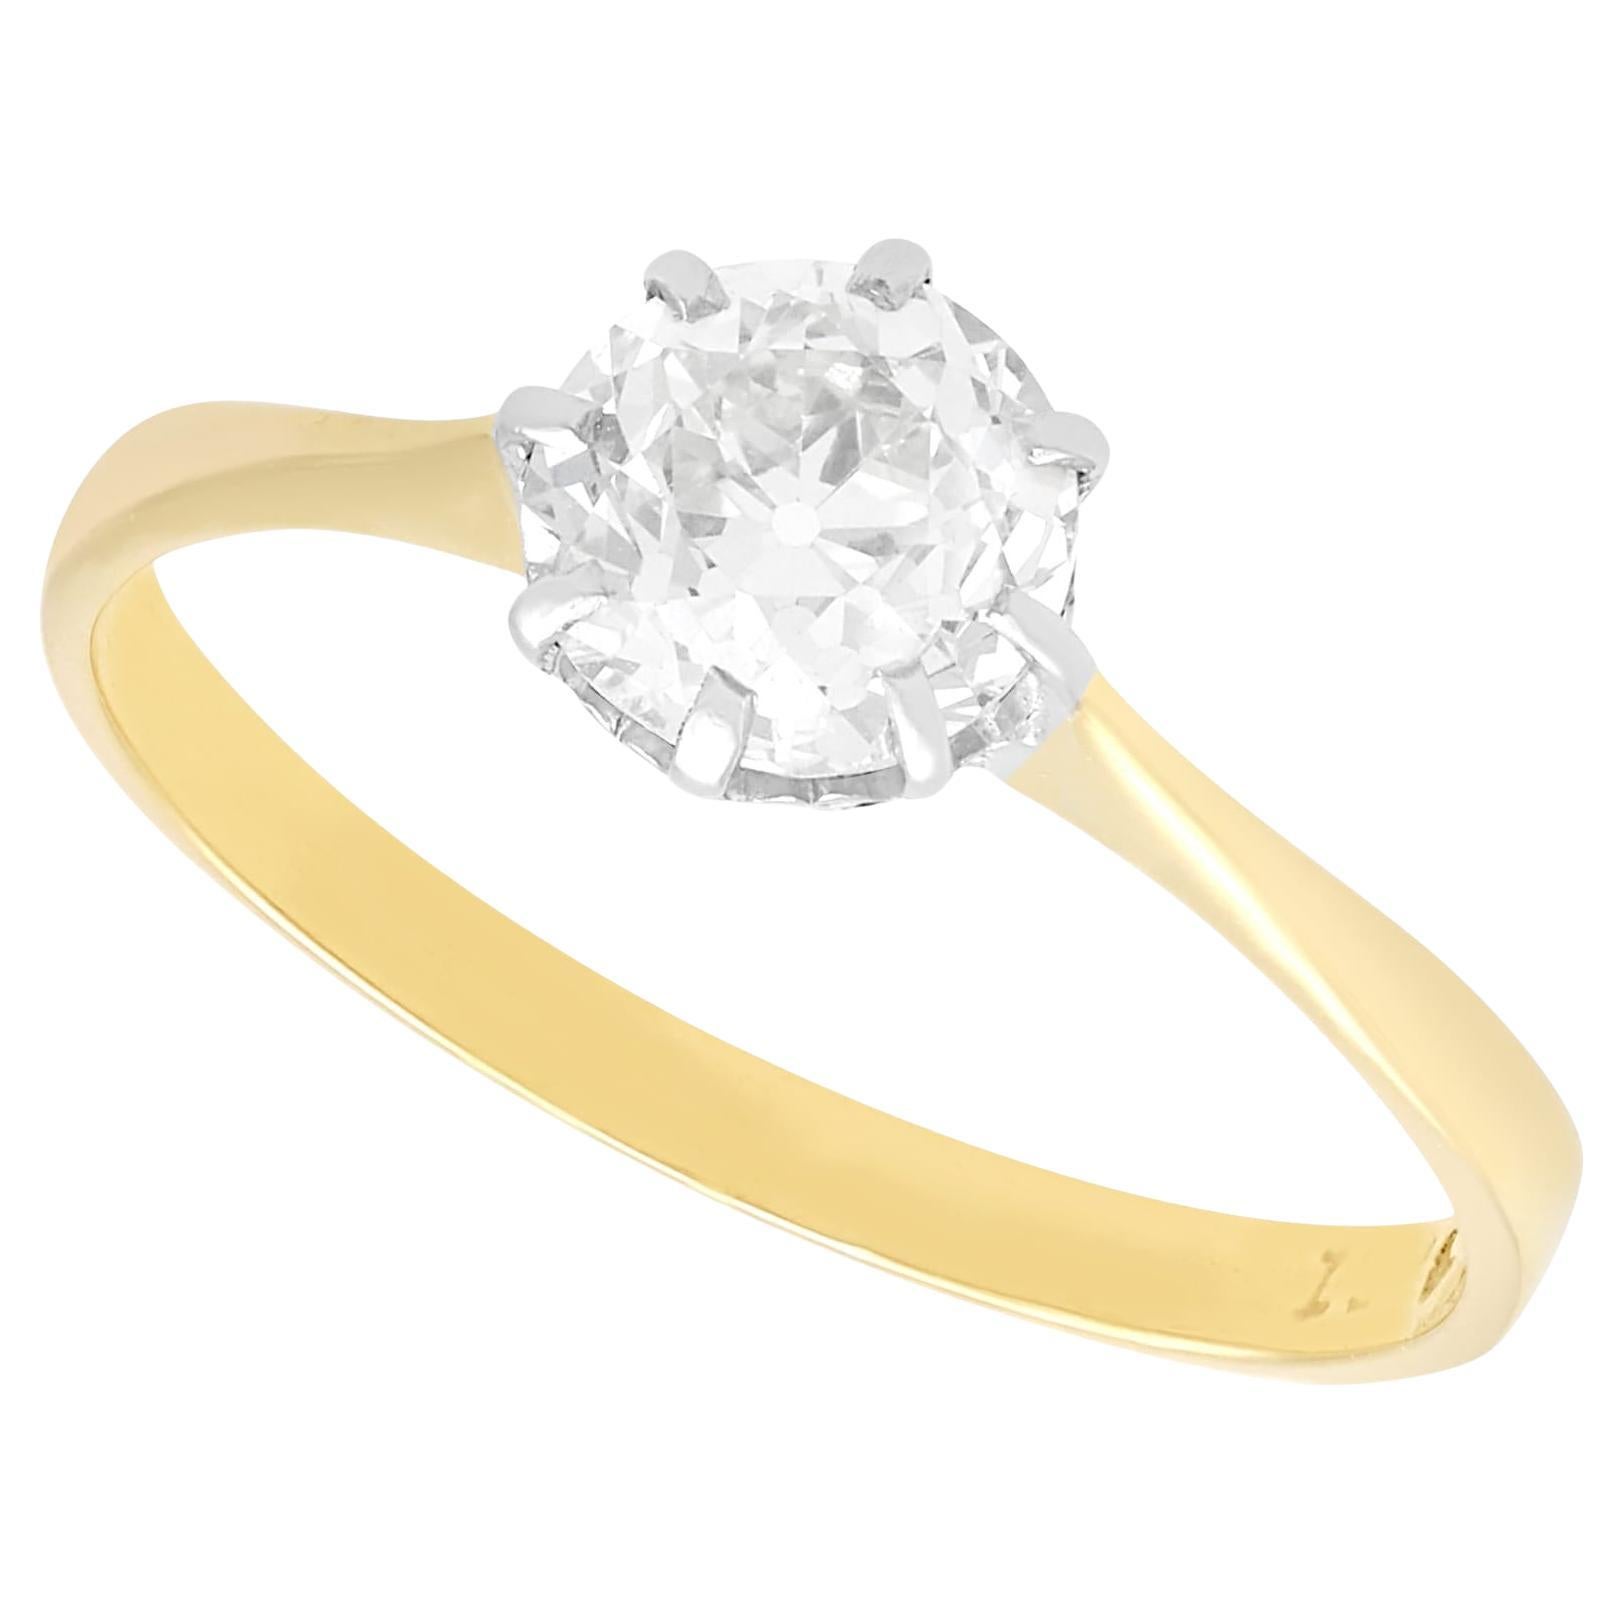 Antique 1.05Ct Diamond and 18k Yellow Gold Solitaire Ring Circa 1900